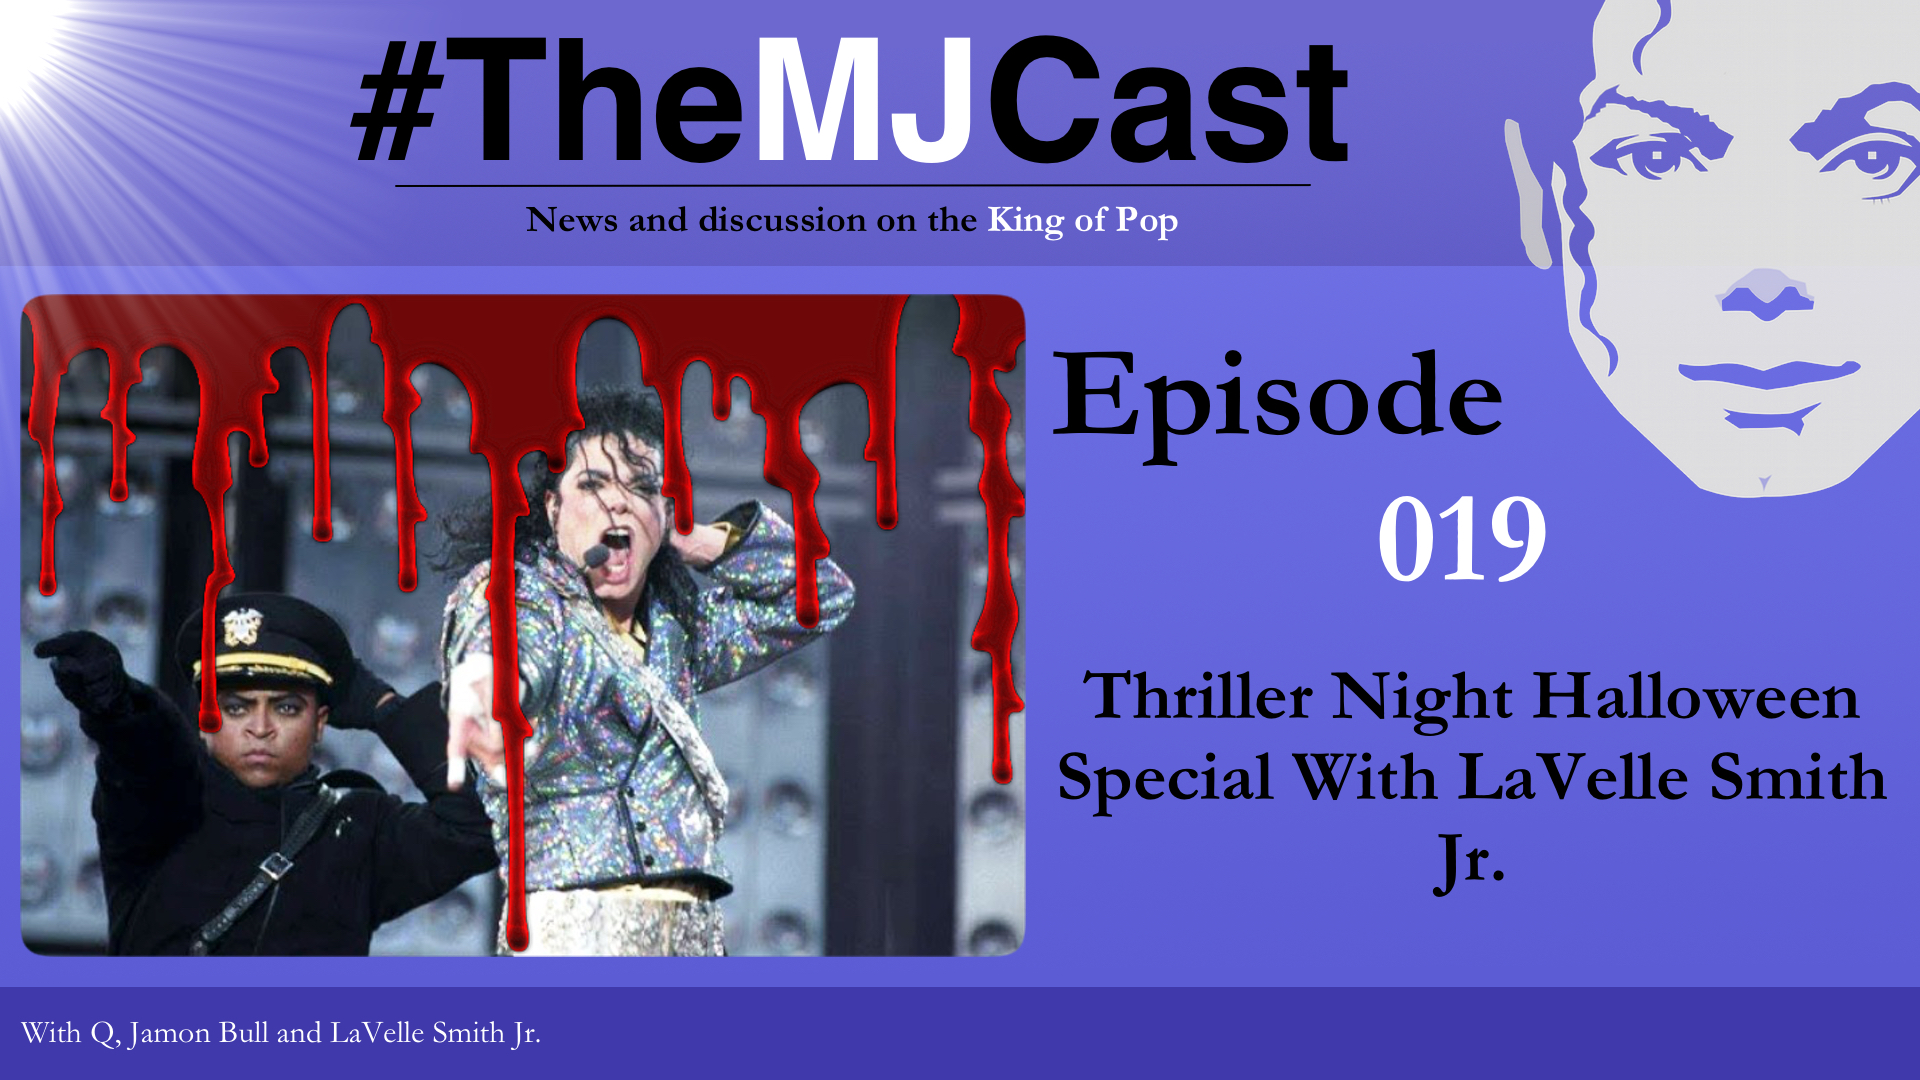 Episode 019 - Thriller Night Halloween Special With LaVelle Smith Jr. YouTube Art